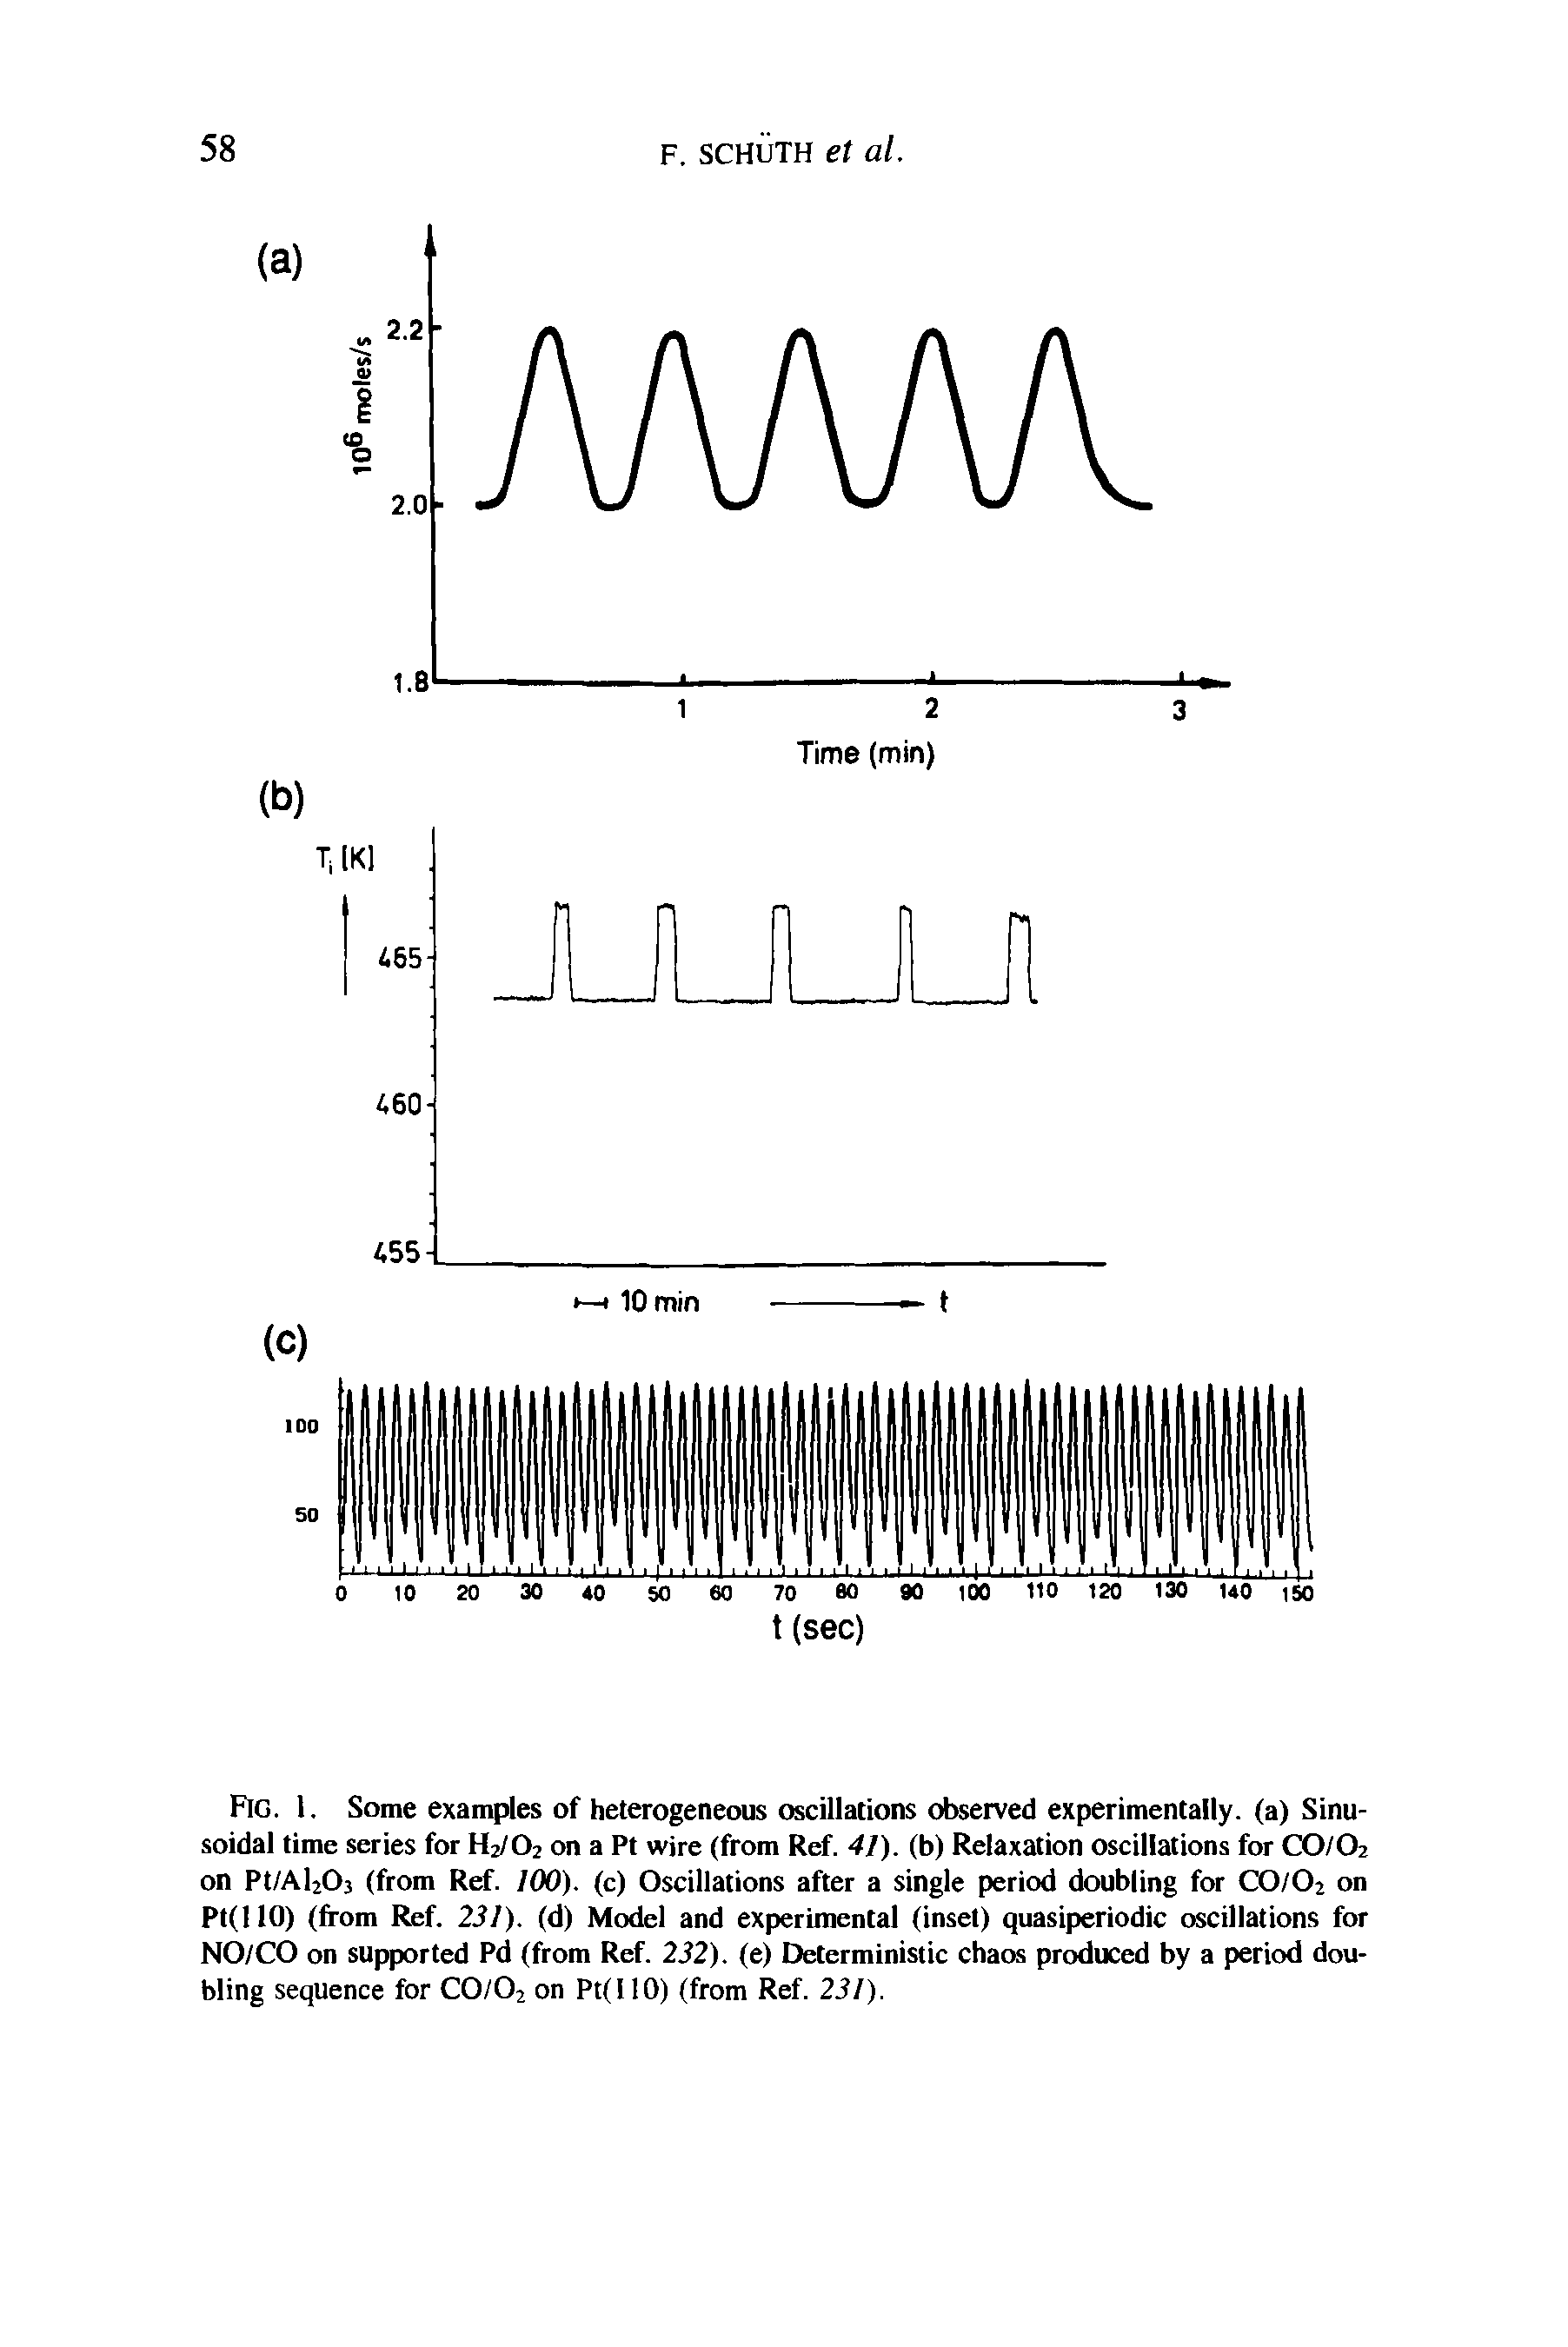 Fig. 1. Some examples of heterogeneous oscillations observed experimentally, (a) Sinusoidal time series for H2/O2 on a Pt wire (from Ref. 41). (b) Relaxation oscillations for CO/O2 on Pt/Al203 (from Ref. 100). (c) Oscillations after a single period doubling for CO/O2 on Pt(l 10) (from Ref. 231). (d) Model and experimental (inset) quasiperiodic oscillations for NO/CO on supported Pd (from Ref. 232). (e) Deterministic chaos produced by a period doubling sequence for CO/O2 on Pt(IlO) (from Ref. 231).